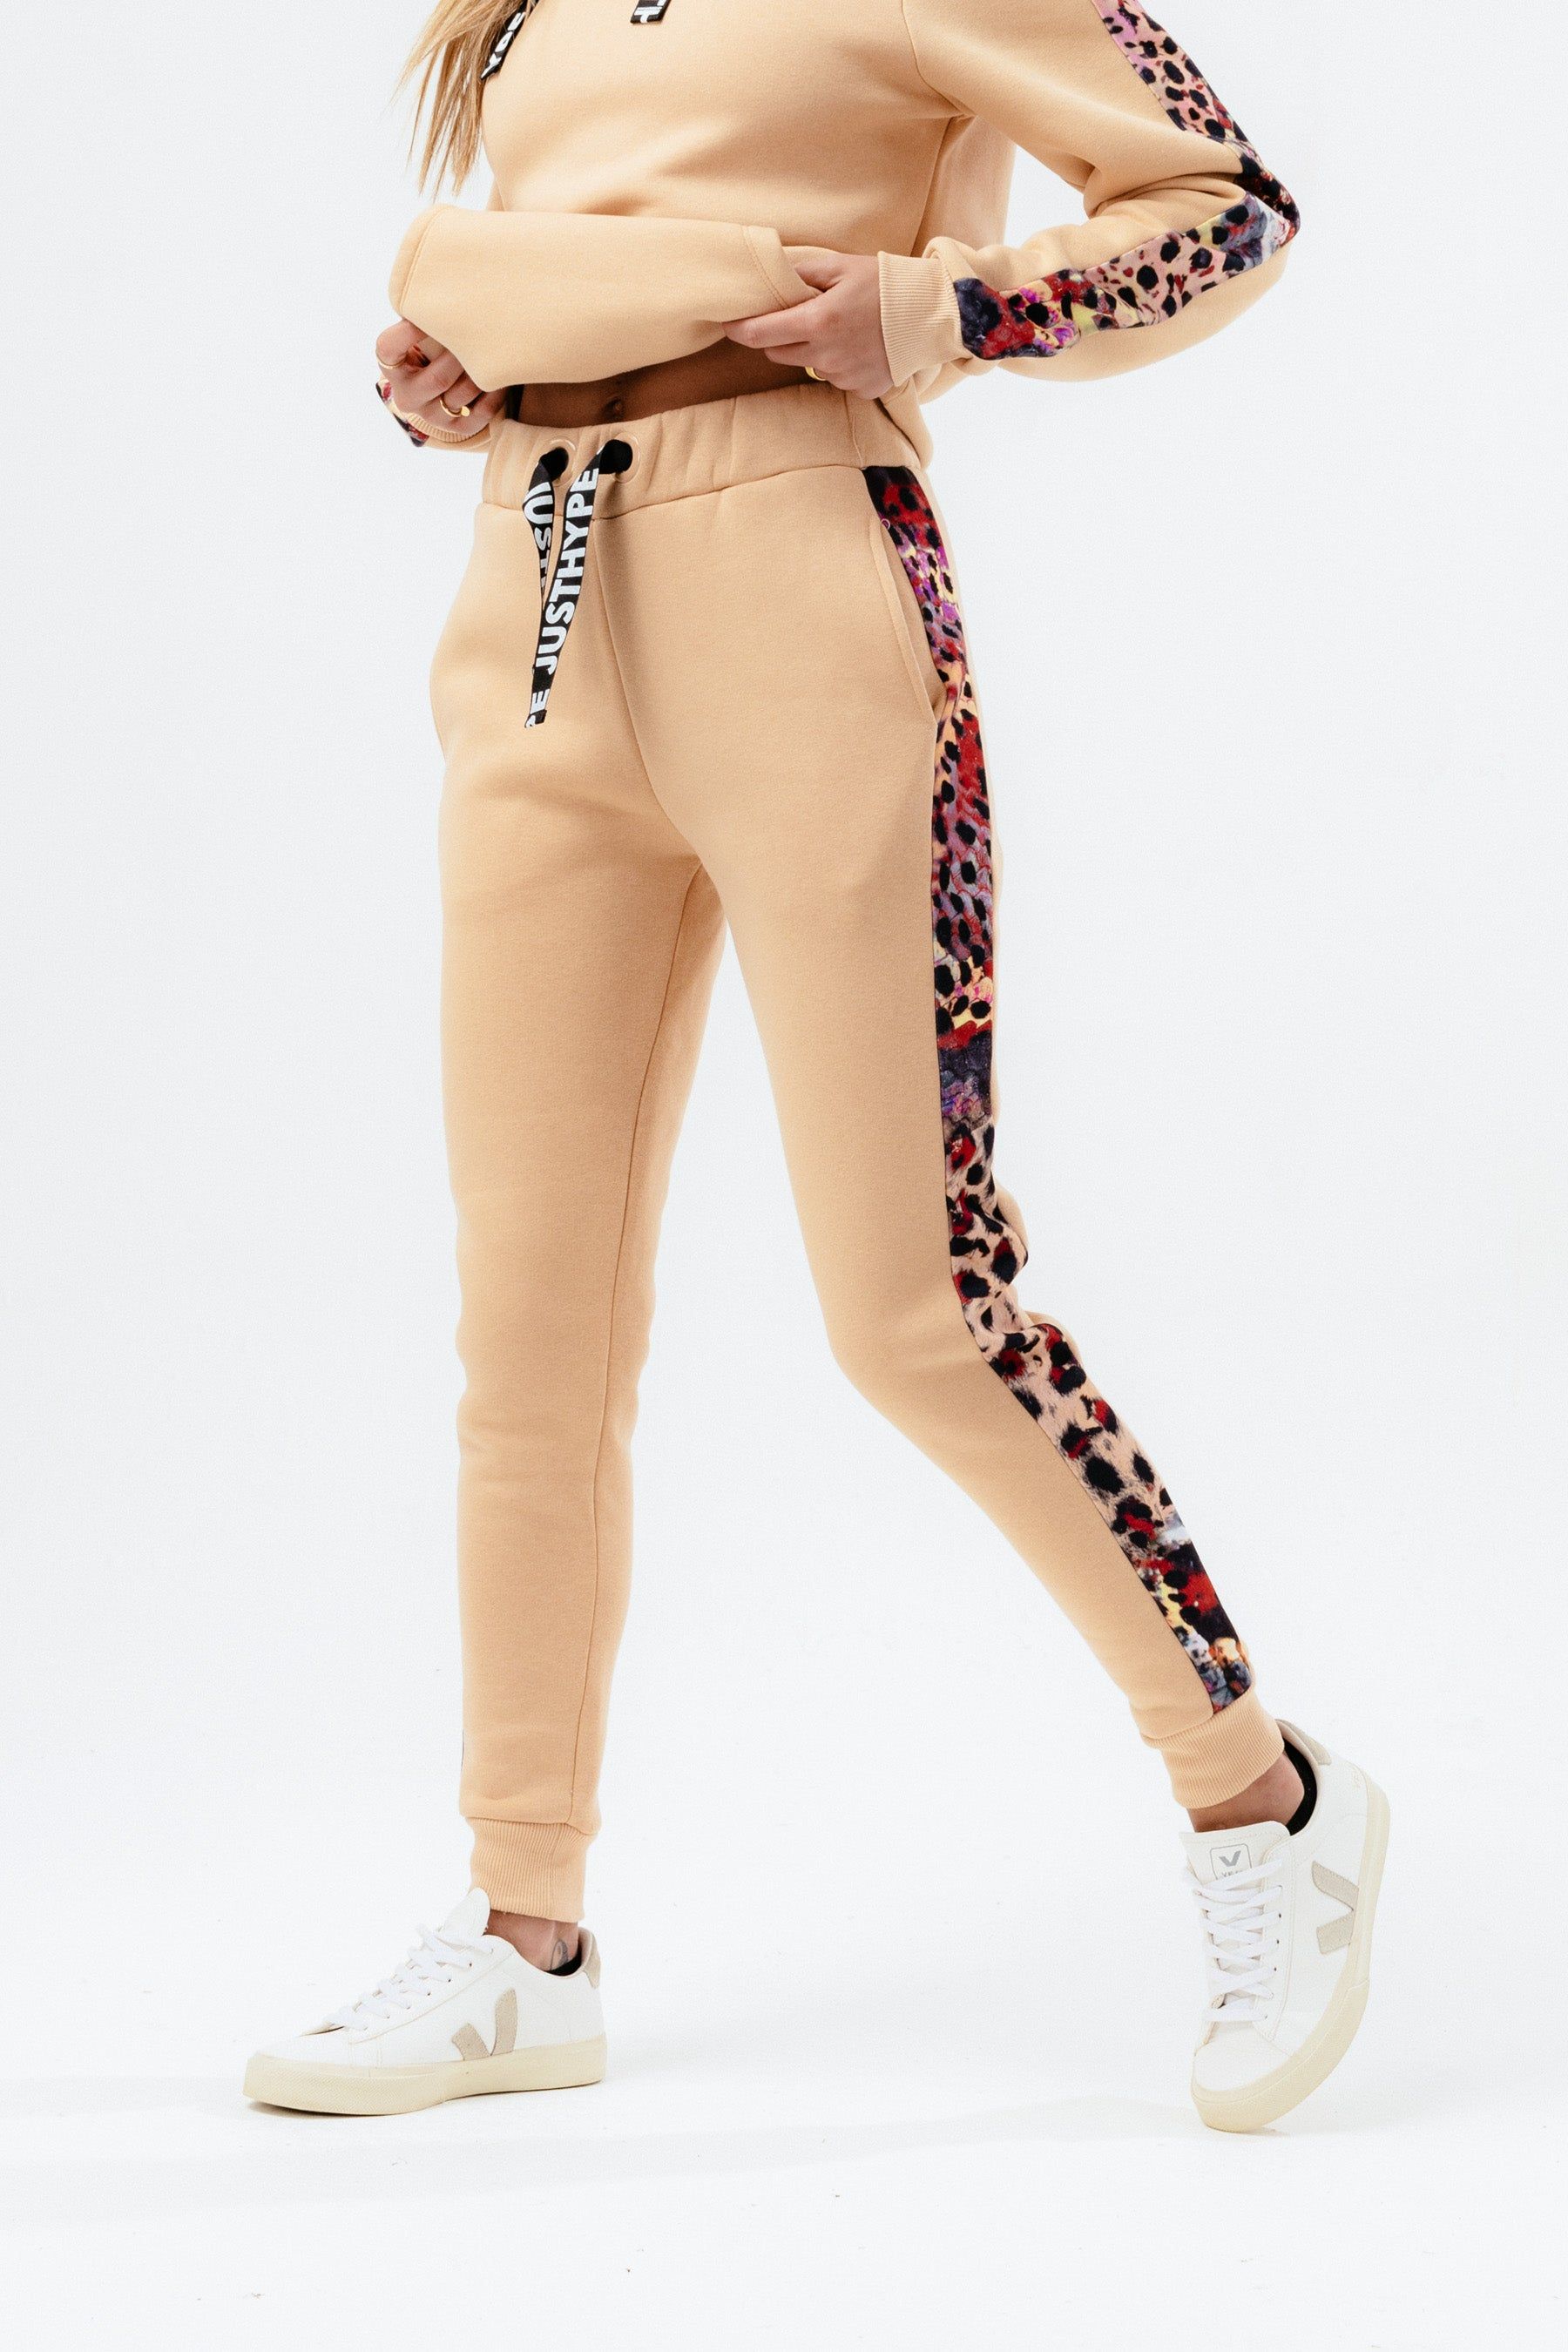 Meet the HYPE. Women’s Hazelnut Animal Print Label Joggers. Made from an 80% cotton 20% poly fabric blend in hazelnut for ultimate comfort. Featuring screen printed drawstrings and sublimated animal print panels, these joggers are the perfect addition to your jogger 'drobe. Wear with the matching HYPE. Hazelnut Animal Print Label Hoodie and T-Shirt for a comfortable, off-duty look.